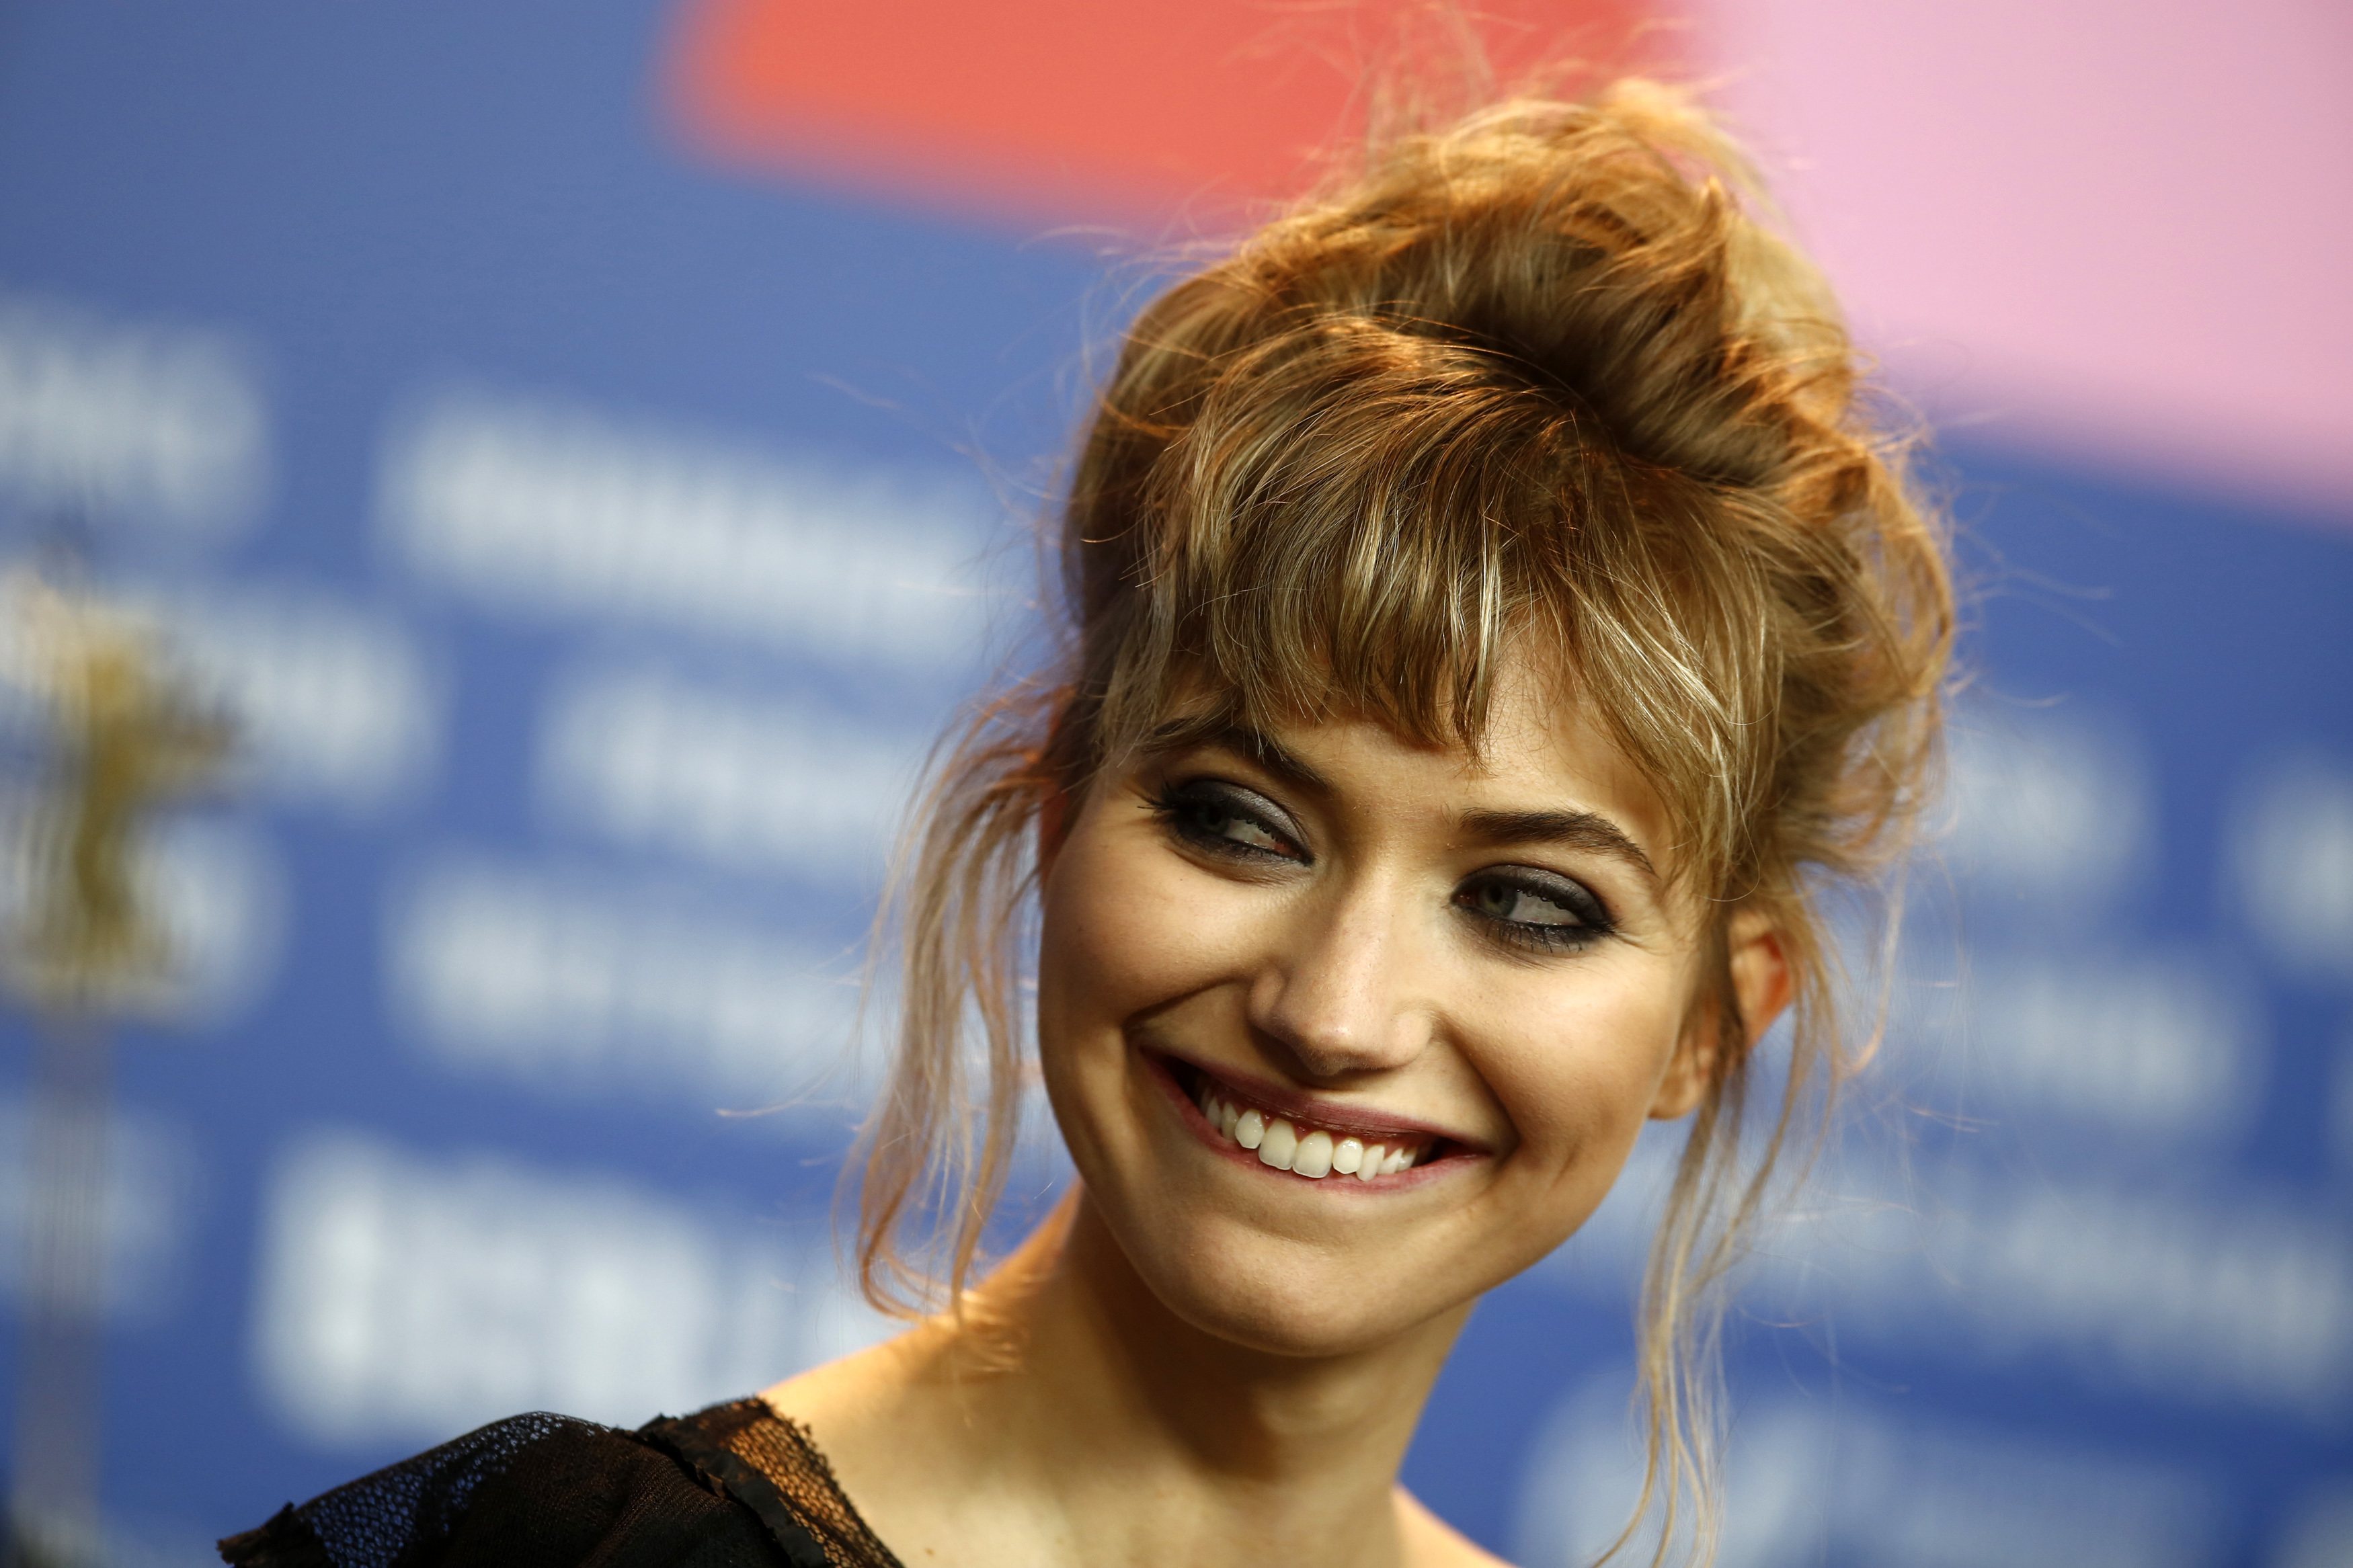 Imogen Poots Hairstyle.